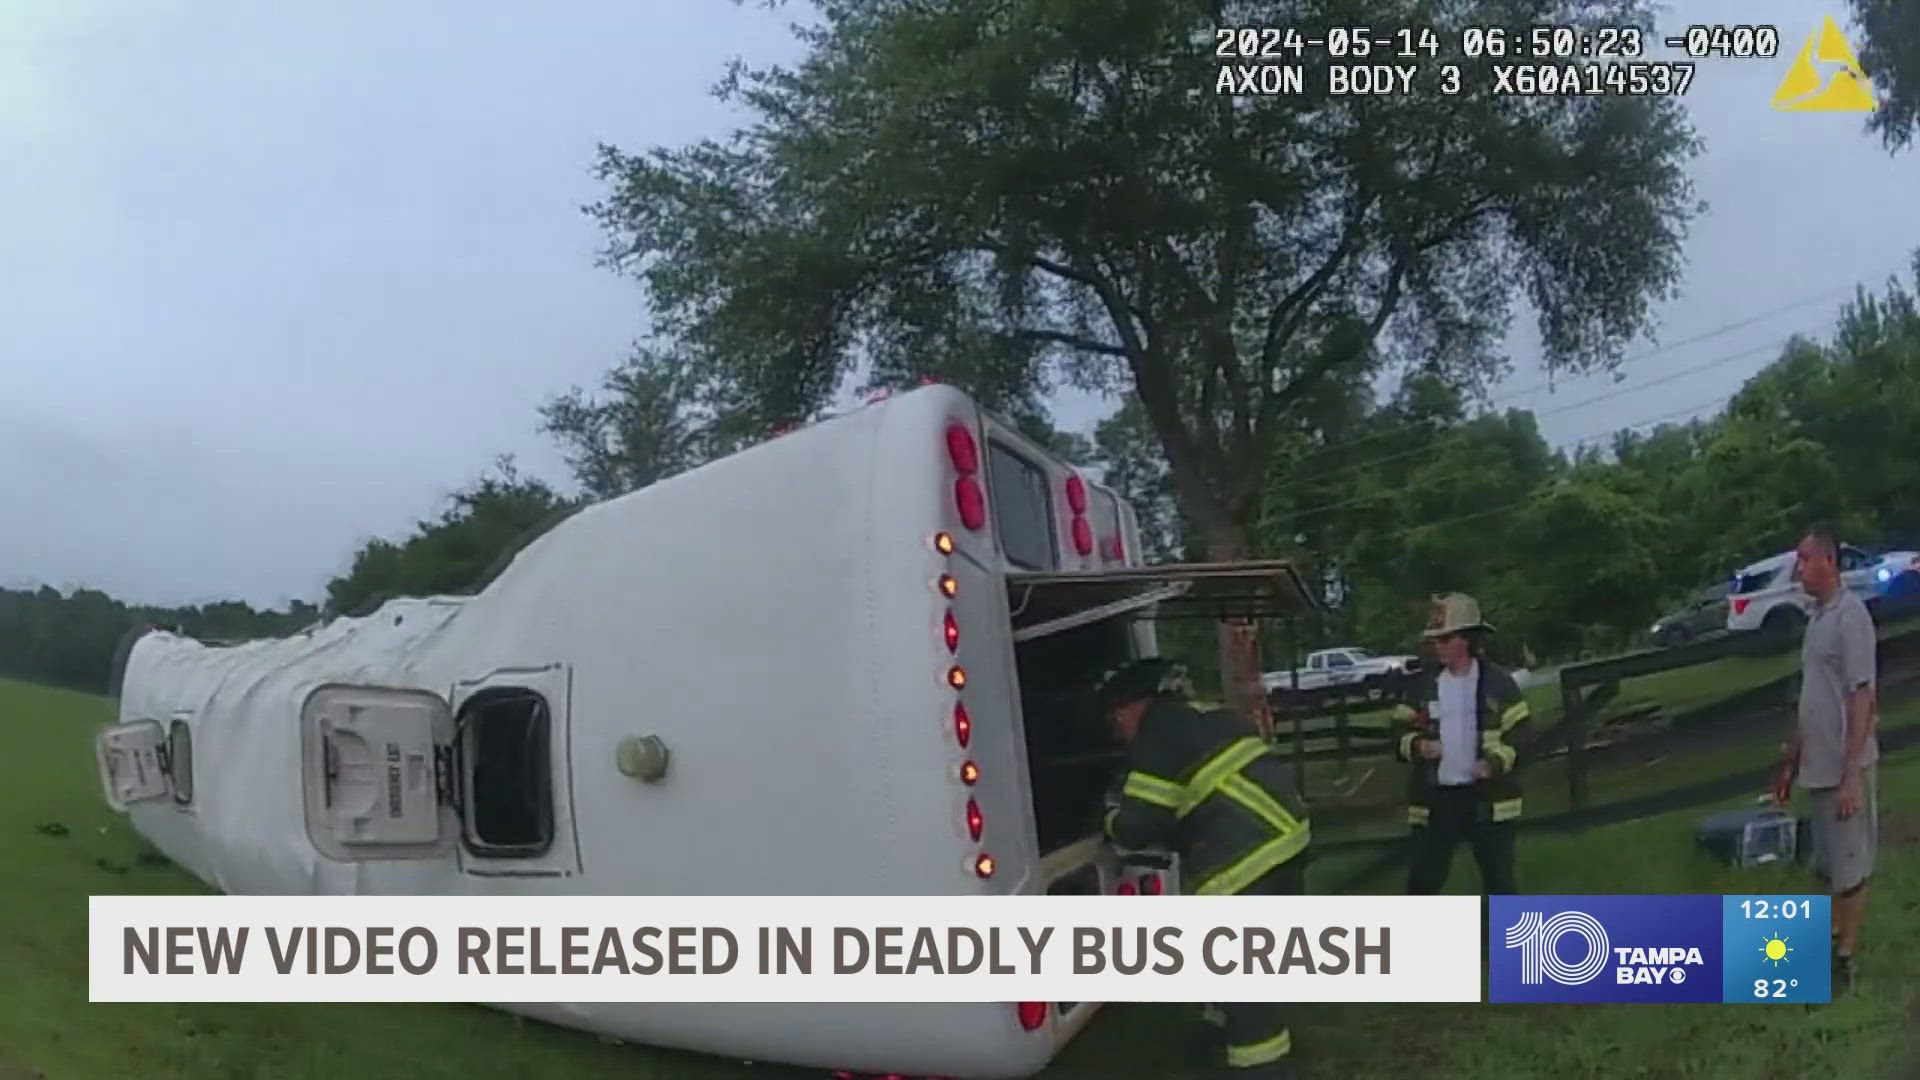 FHP said a pickup truck sideswiped a bus transporting workers to a local farm, causing a rollover crash that killed eight people and hurt dozens more.